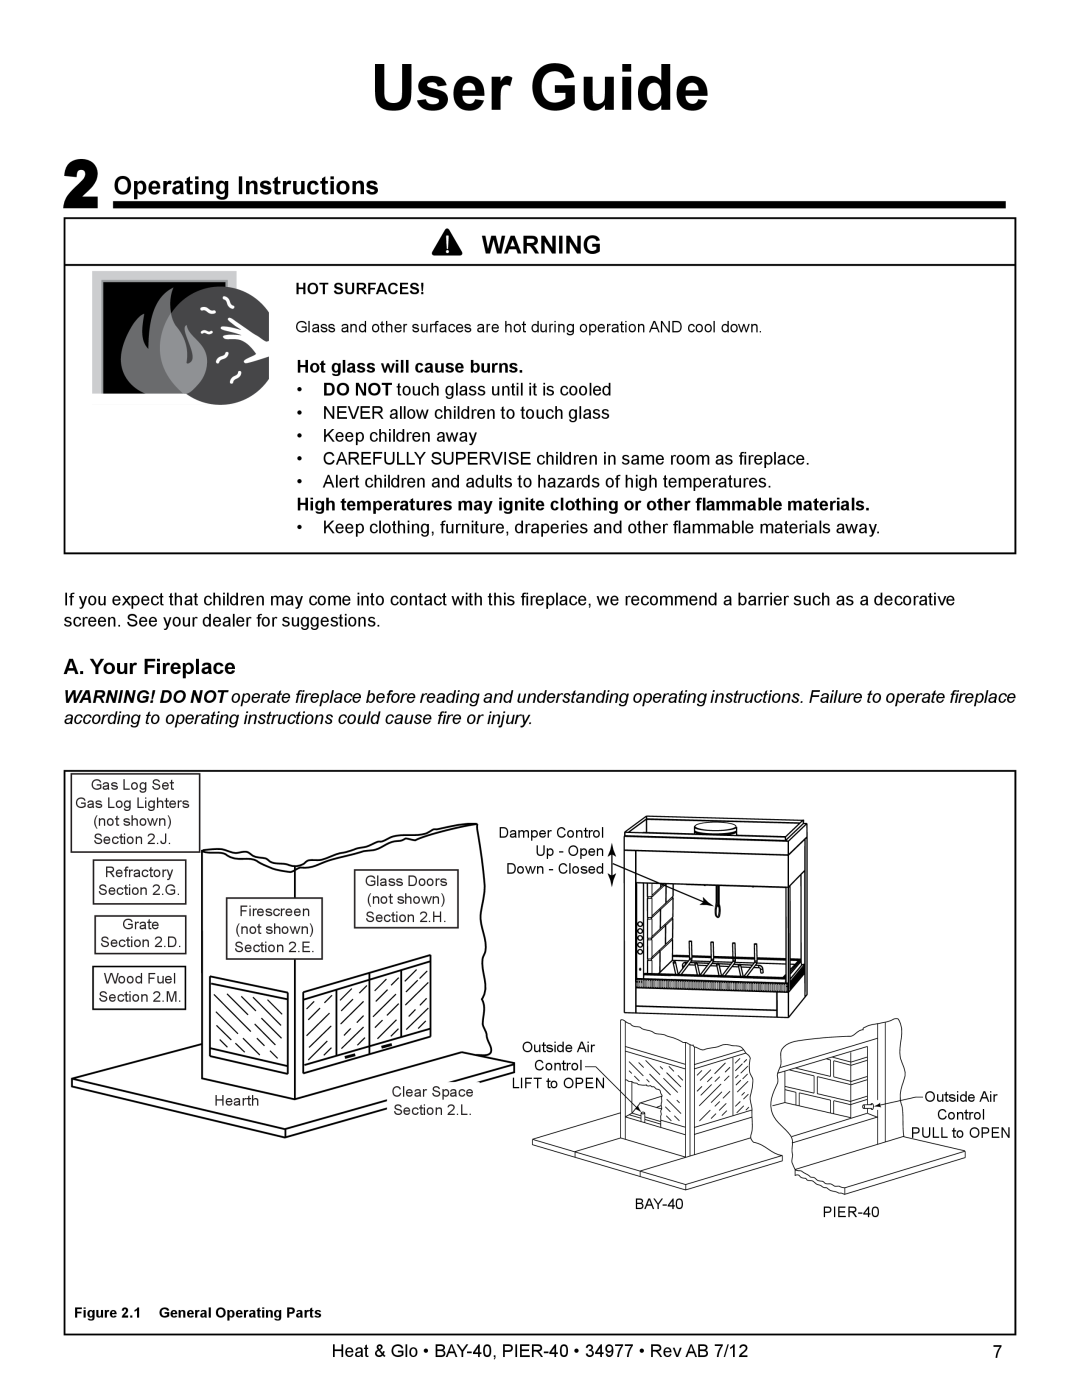 Heat & Glo LifeStyle PIER-40 User Guide, 2Operating Instructions, A. Your Fireplace, Hot glass will cause burns 